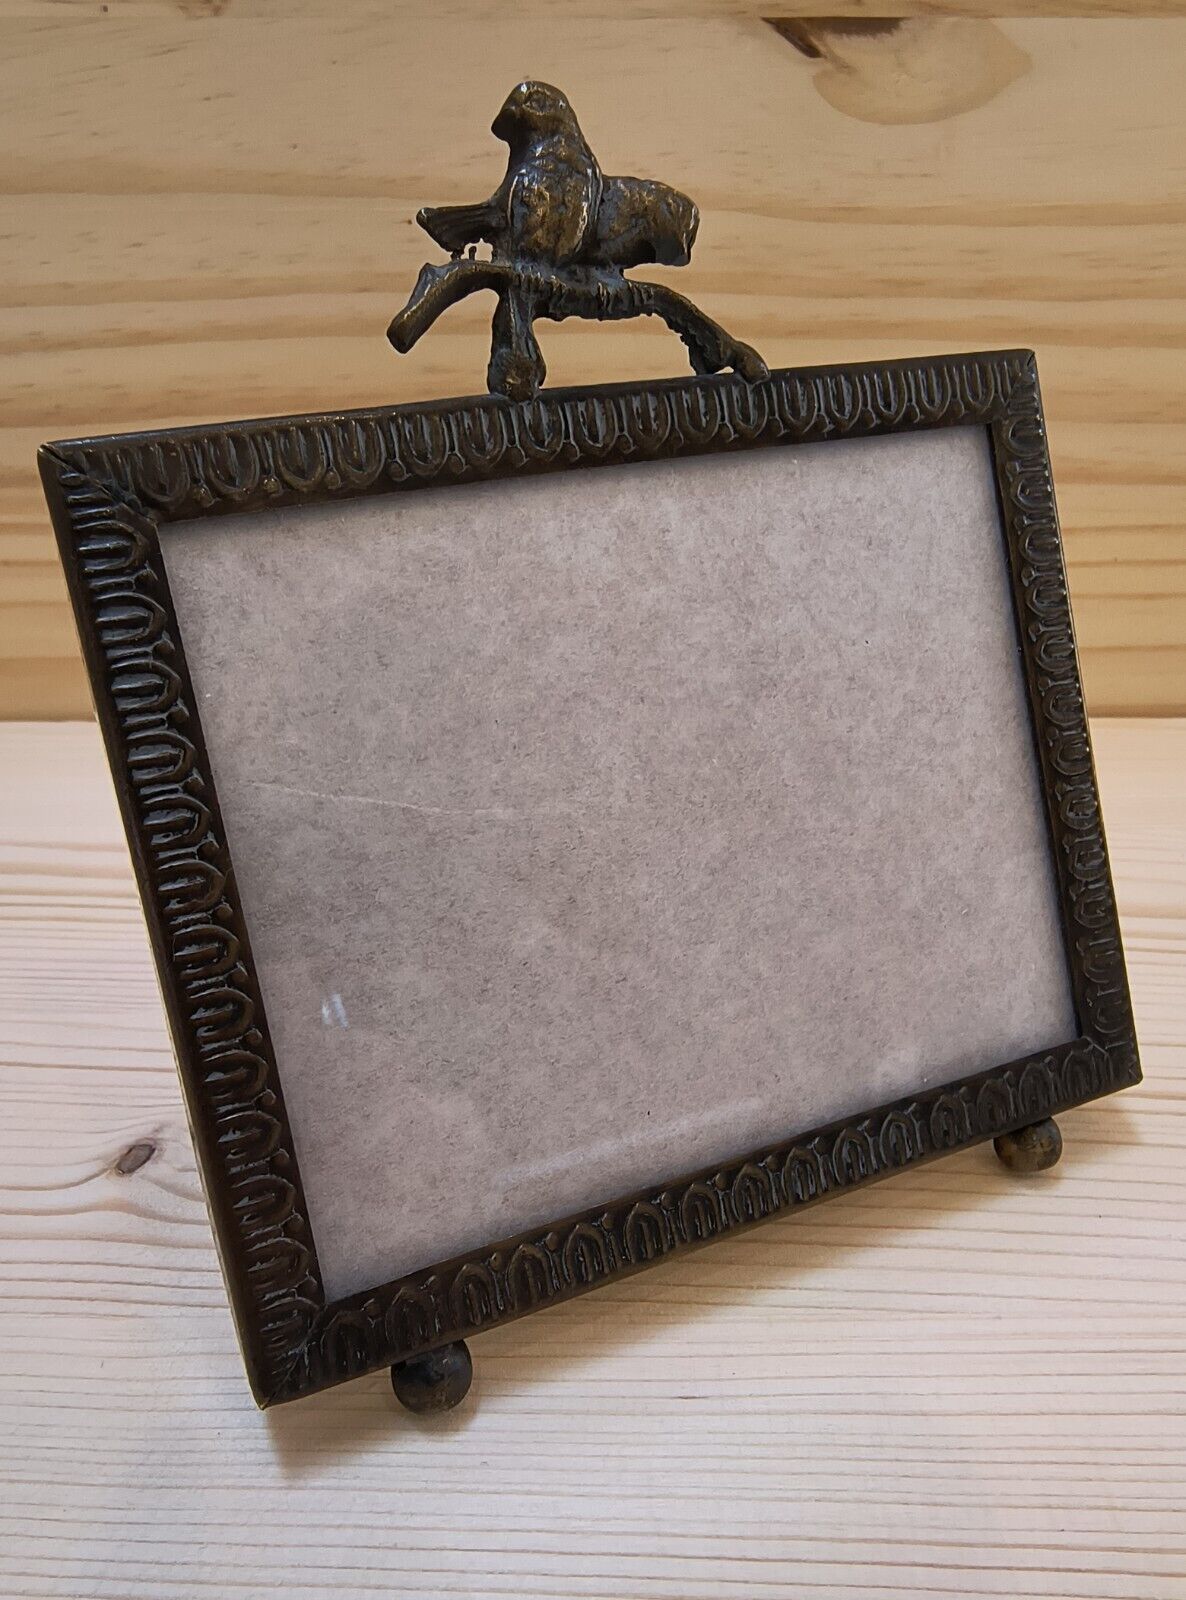 Antique small brass picture frame - 19th century, French - Two Birds - VTG 1880s